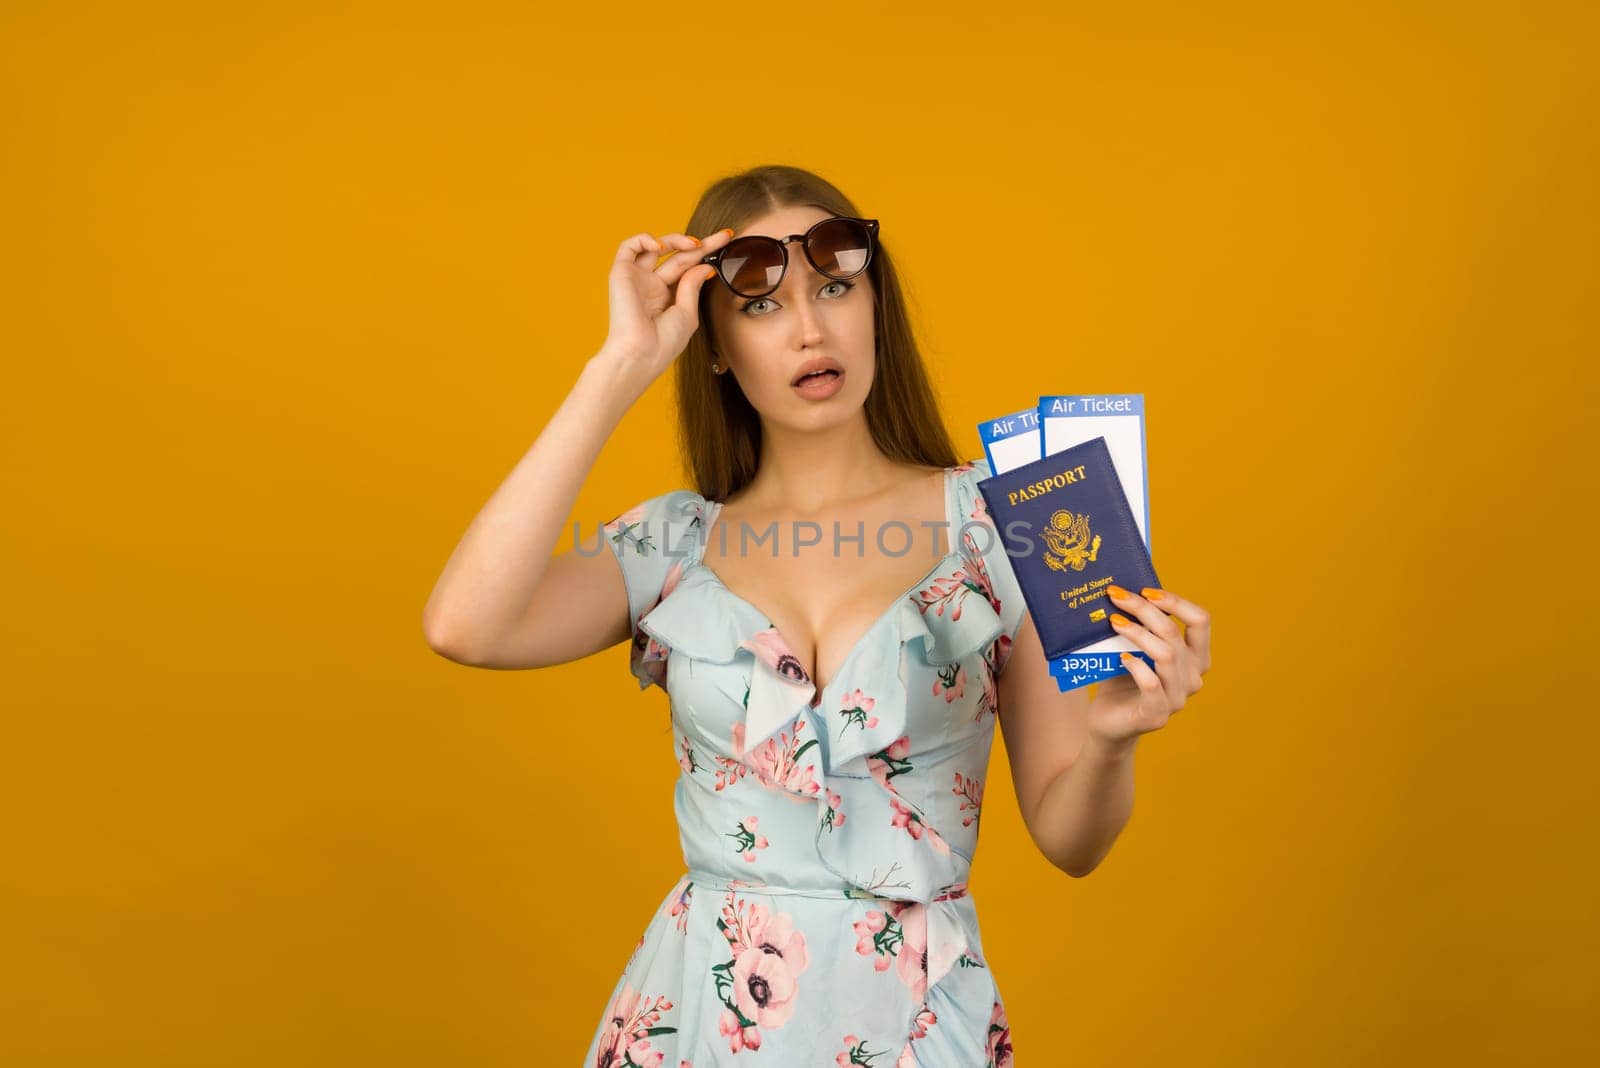 Pop-eyed young woman in blue dress with flowers and sunglasses is holding airline tickets with a passport on a yellow background. by zartarn